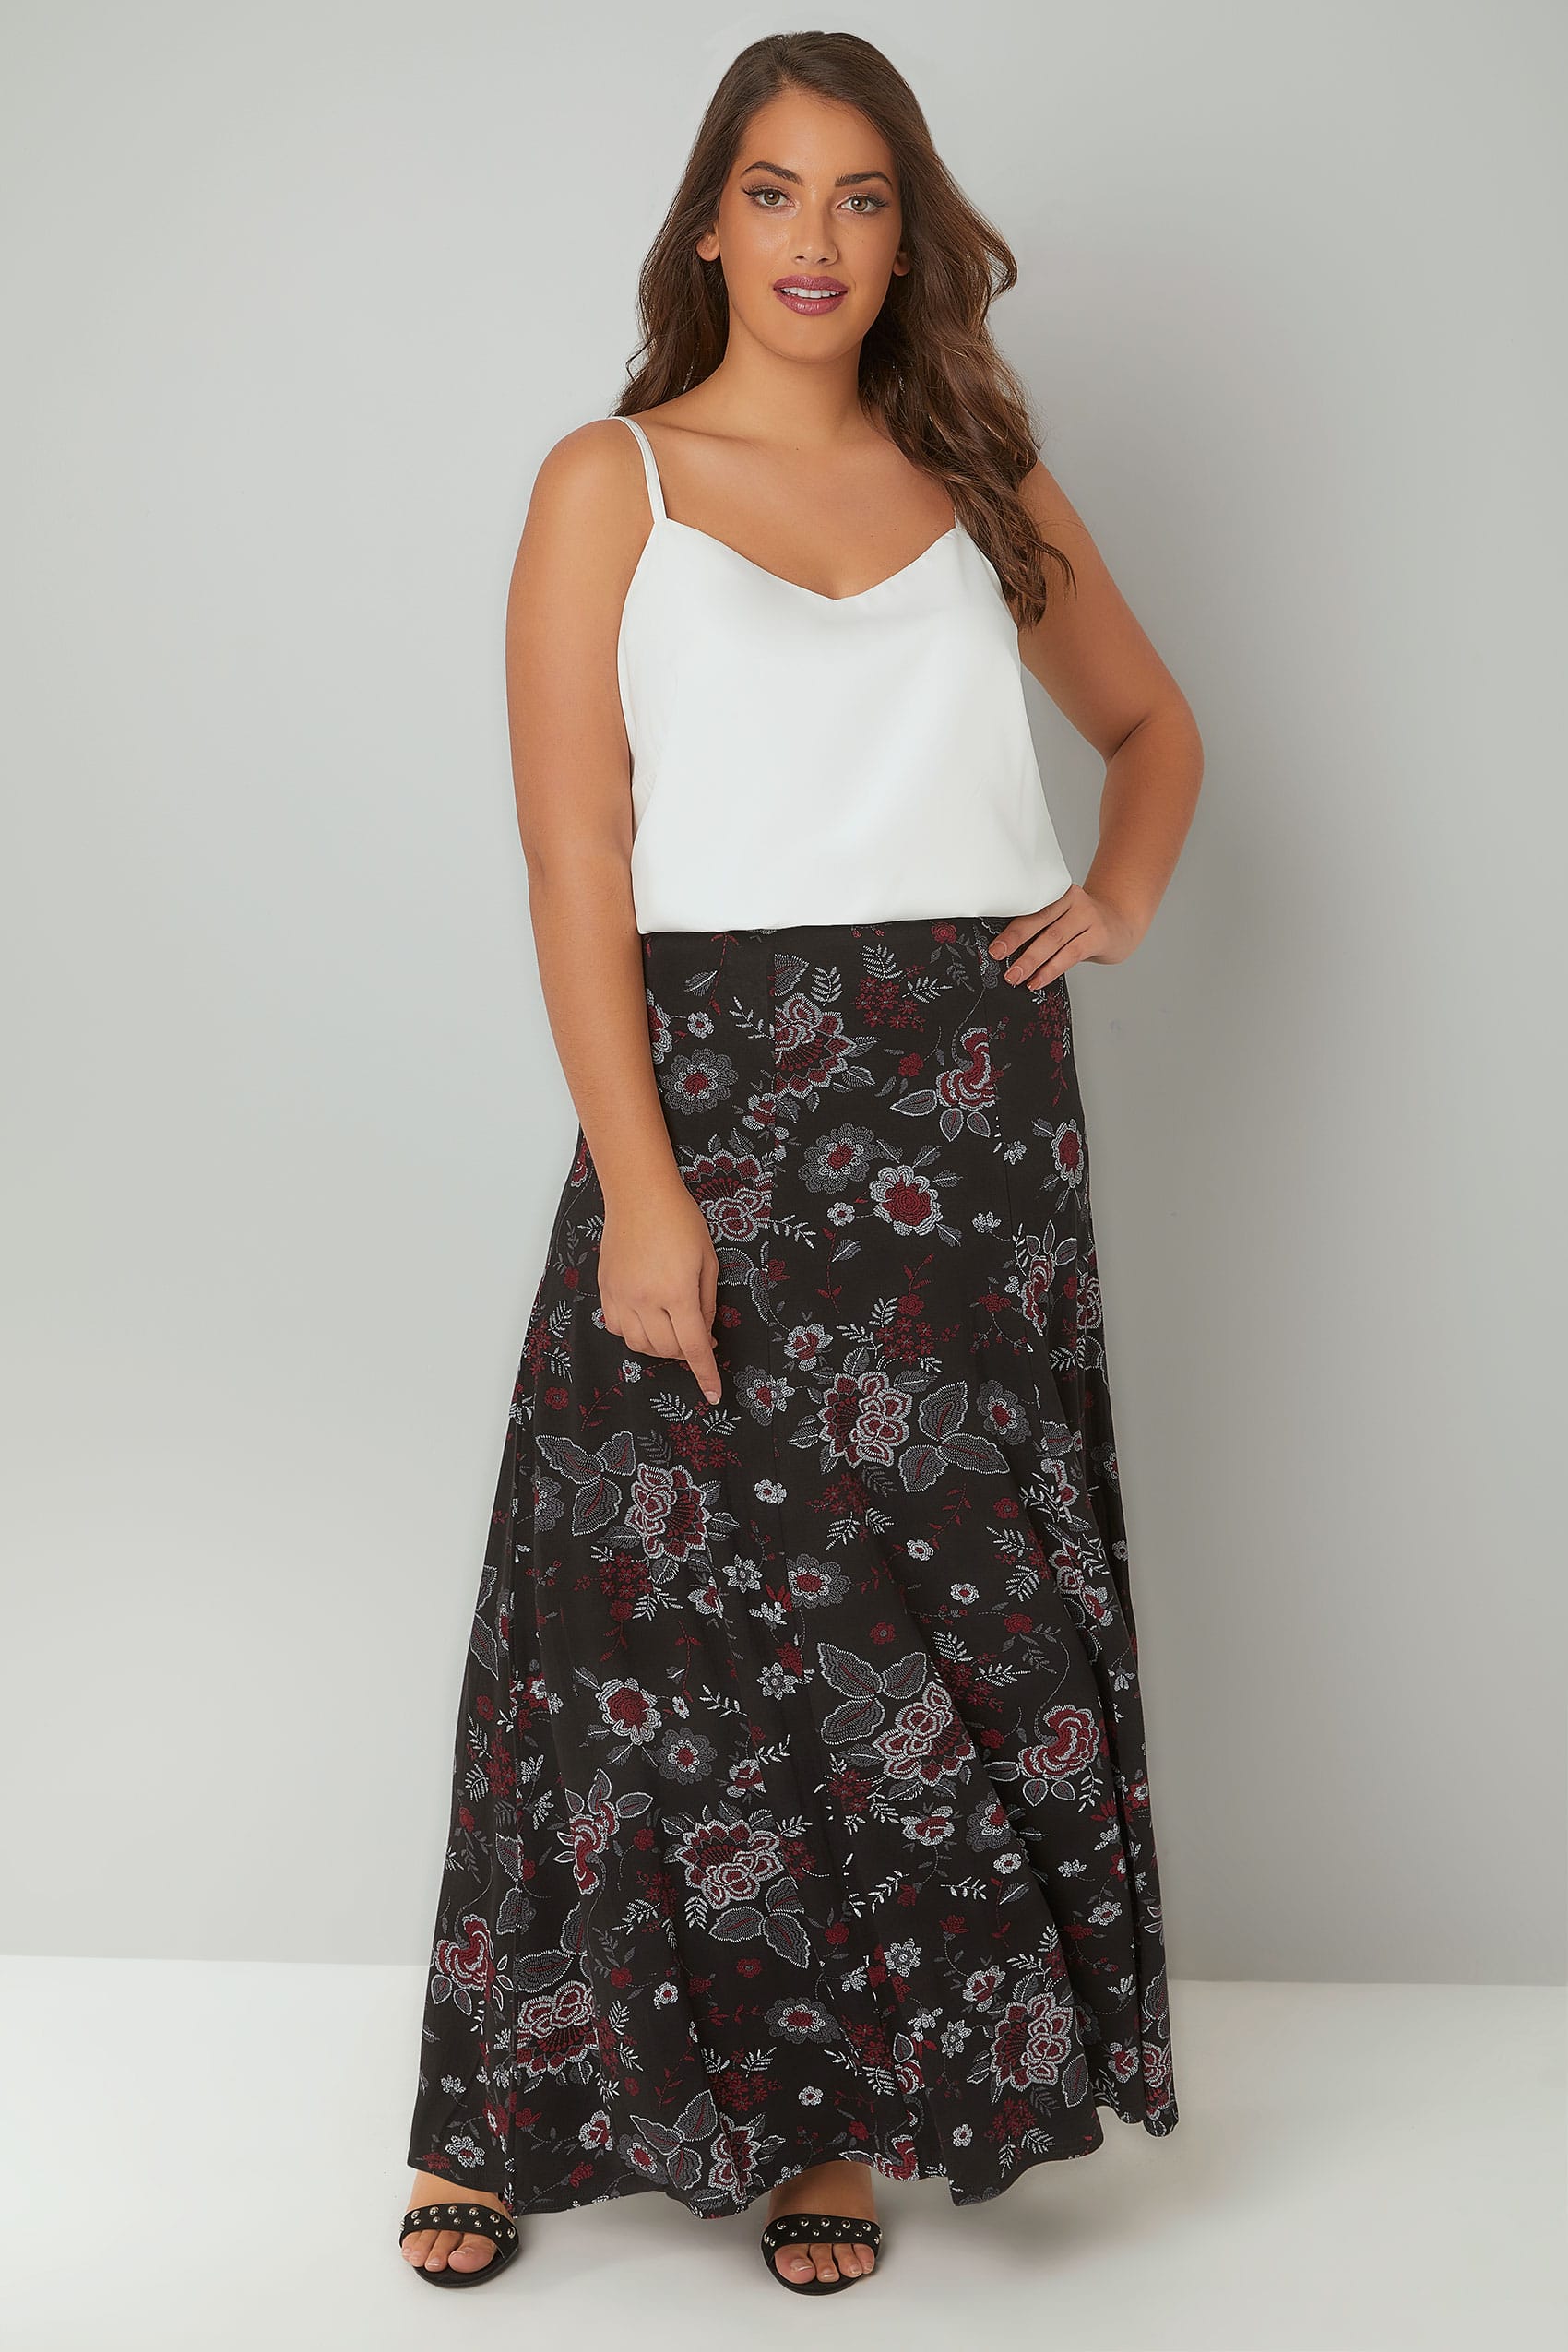 Black & Red Floral Print Maxi Skirt, Plus size 16 to 36